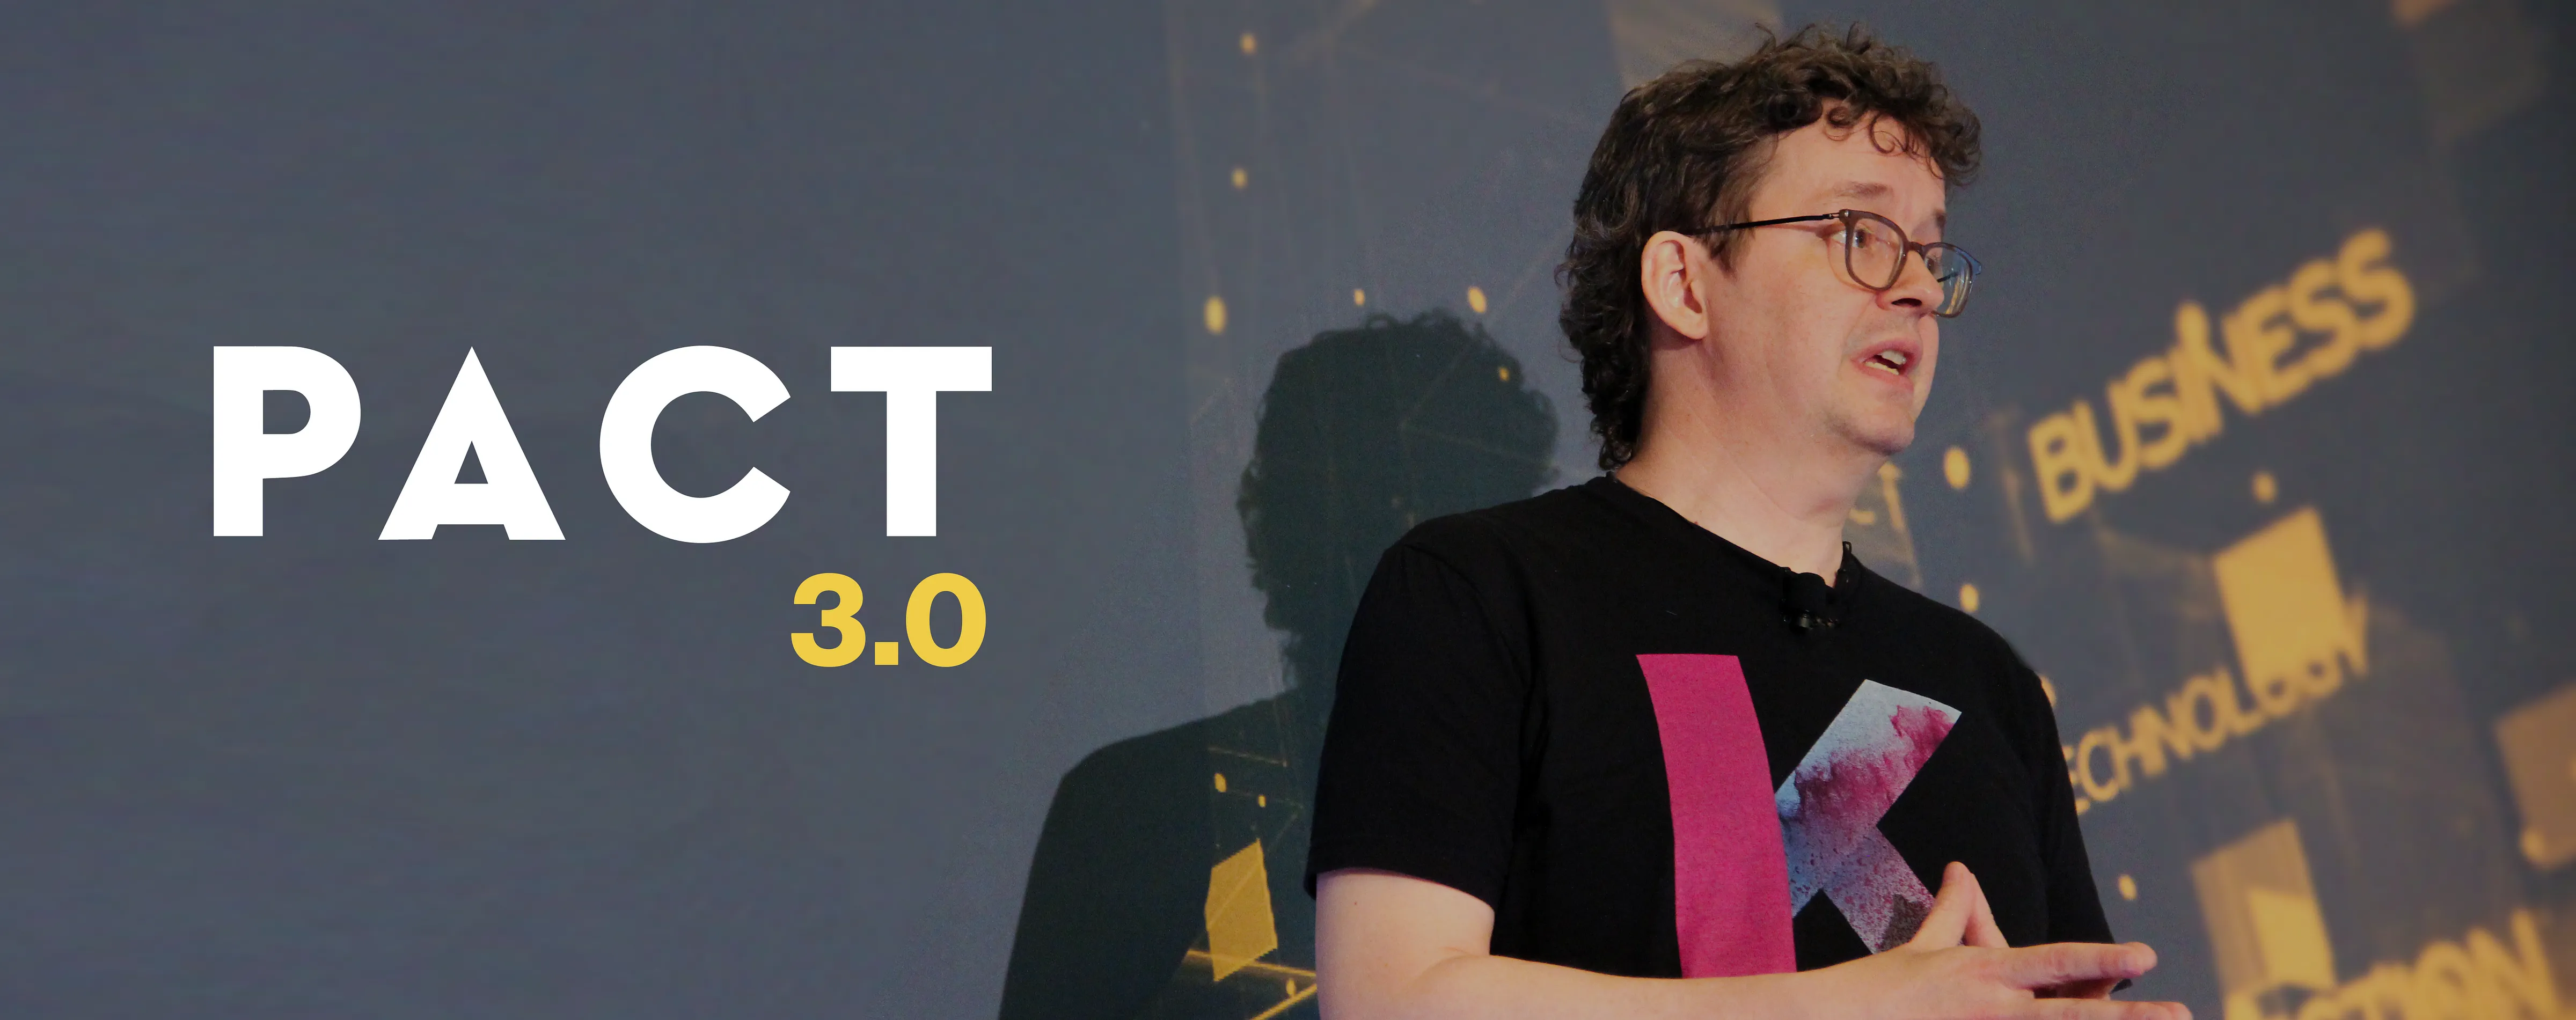 Announcing Pact 3.0